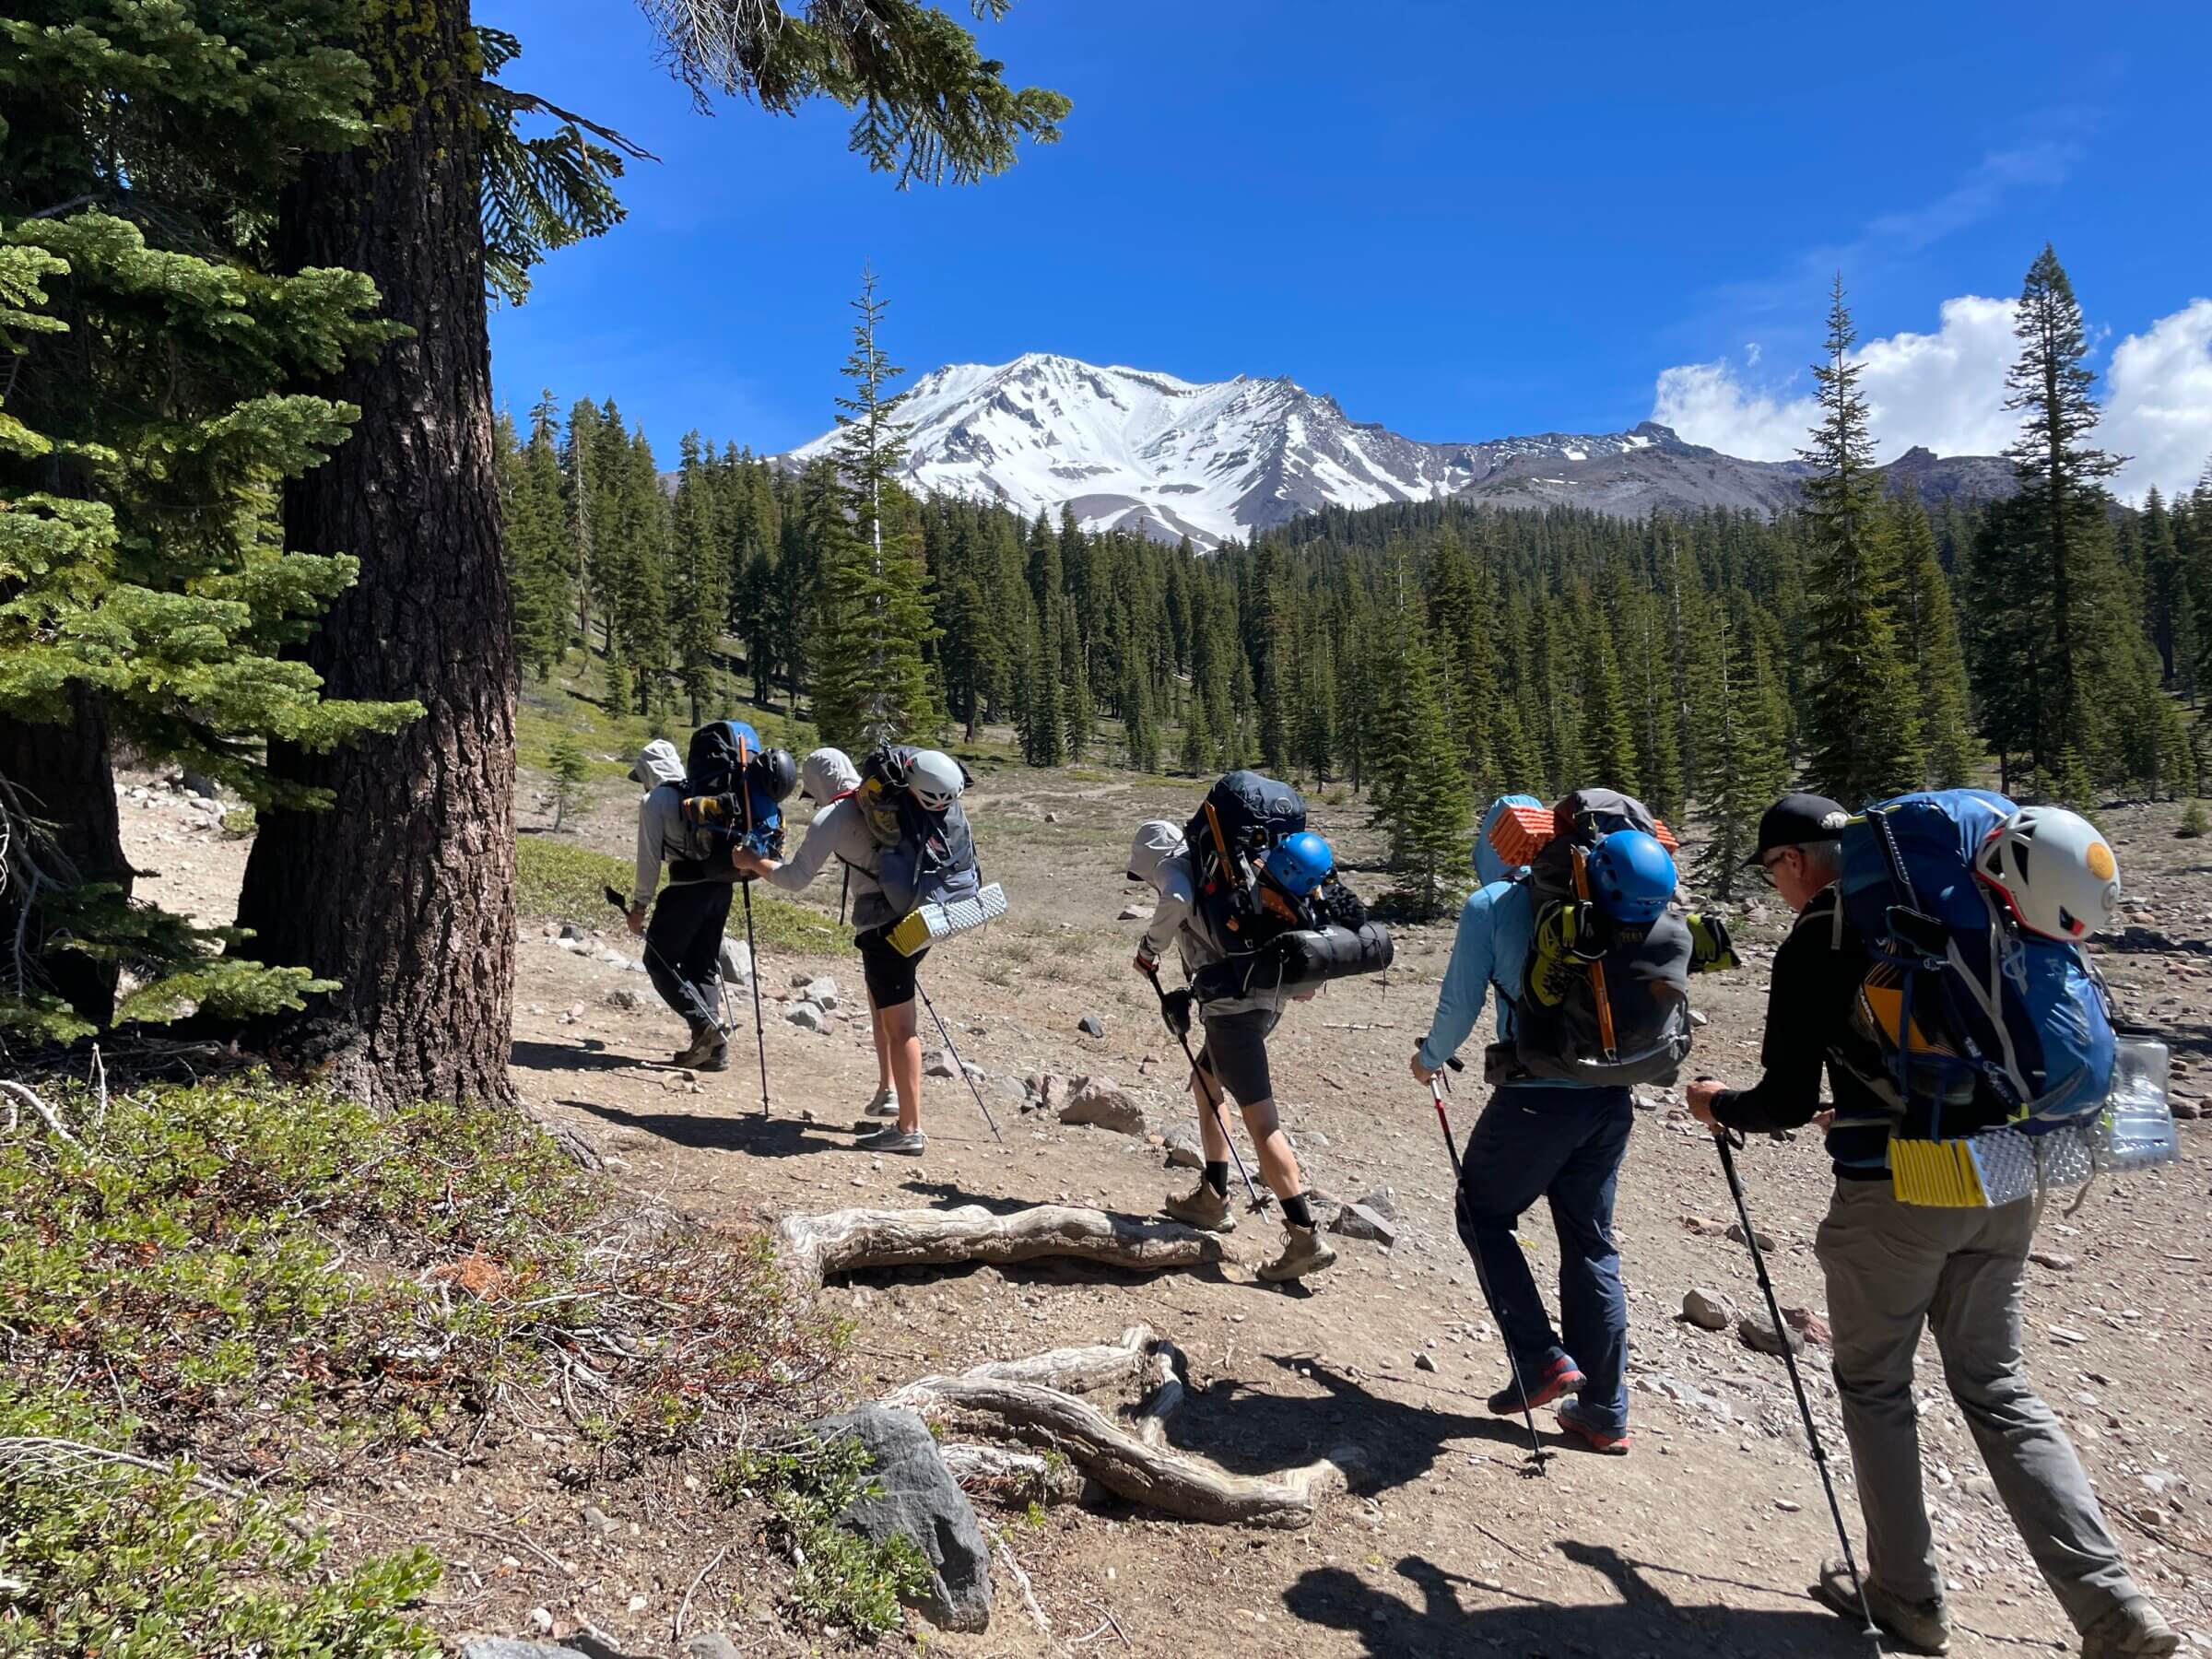 A group of backpackers heading to climb Mount Shasta with Alpenglow Expeditions